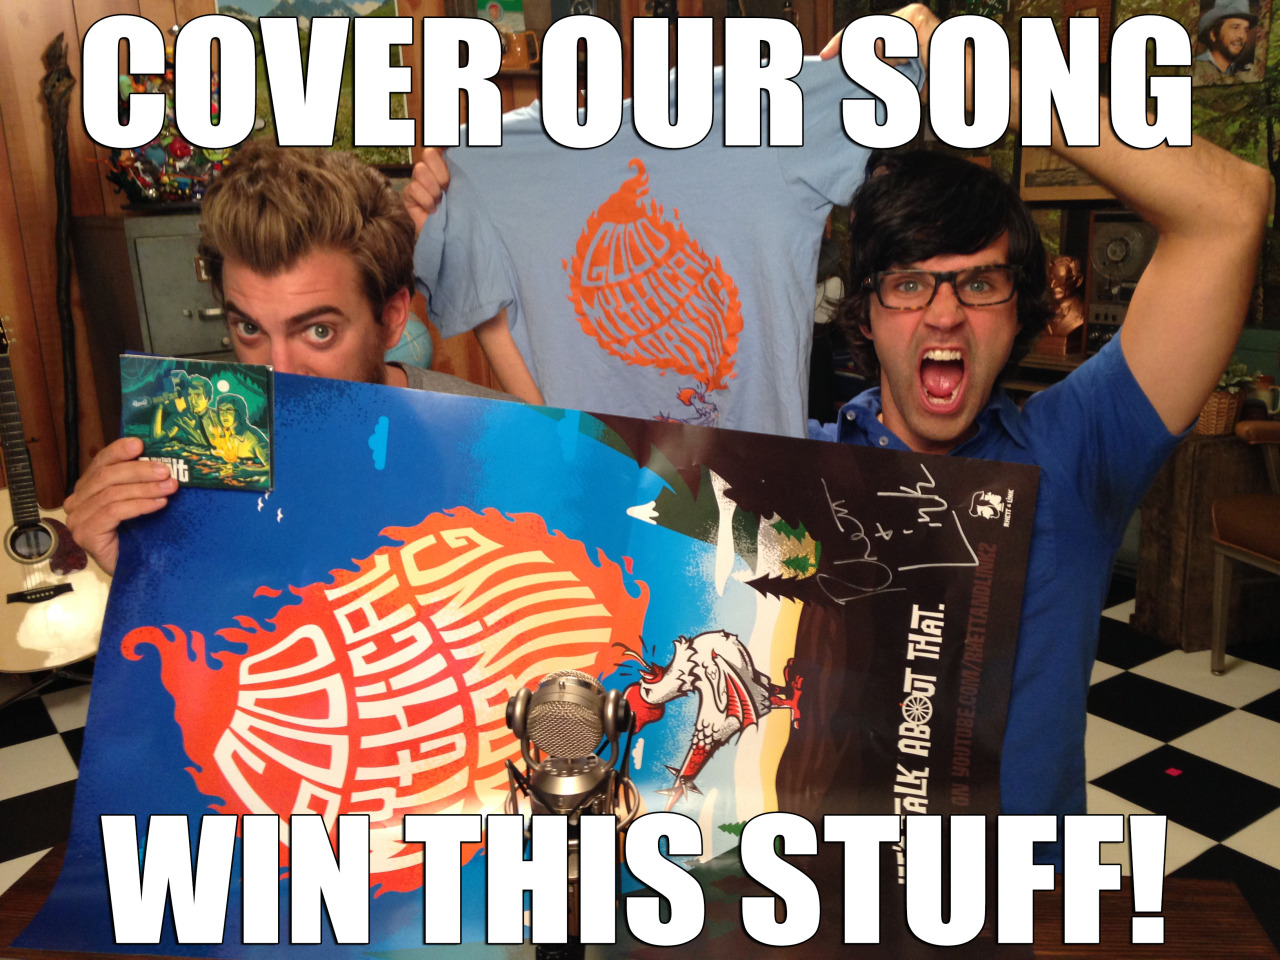 Shirt contest good mythical morning Enter the